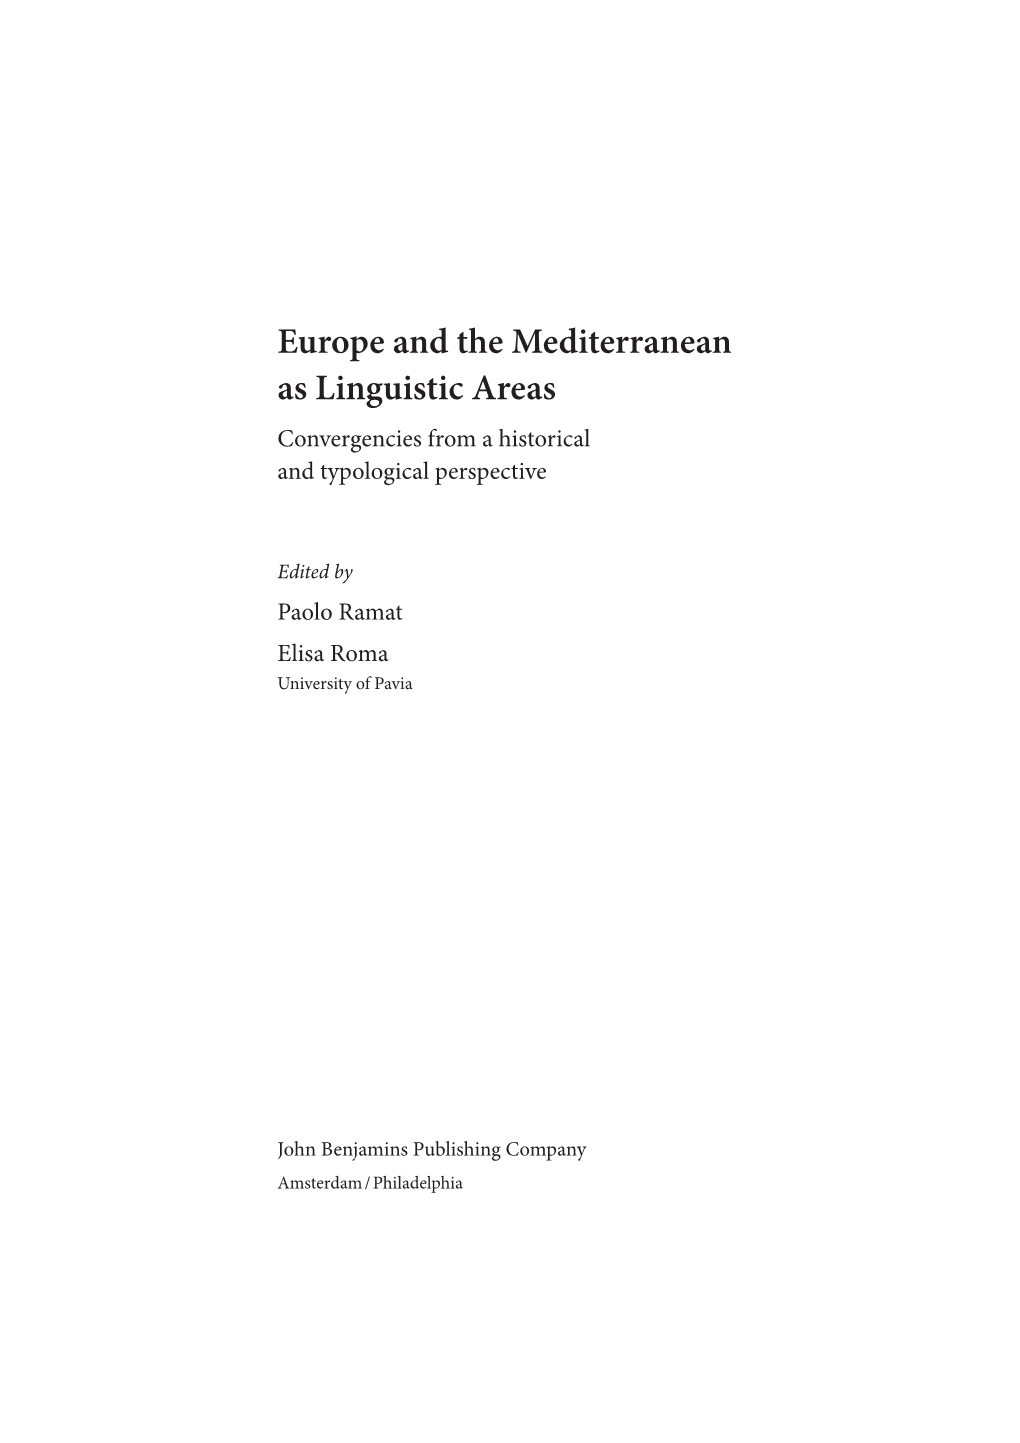 Europe and the Mediterranean As Linguistic Areas Convergencies from a Historical and Typological Perspective